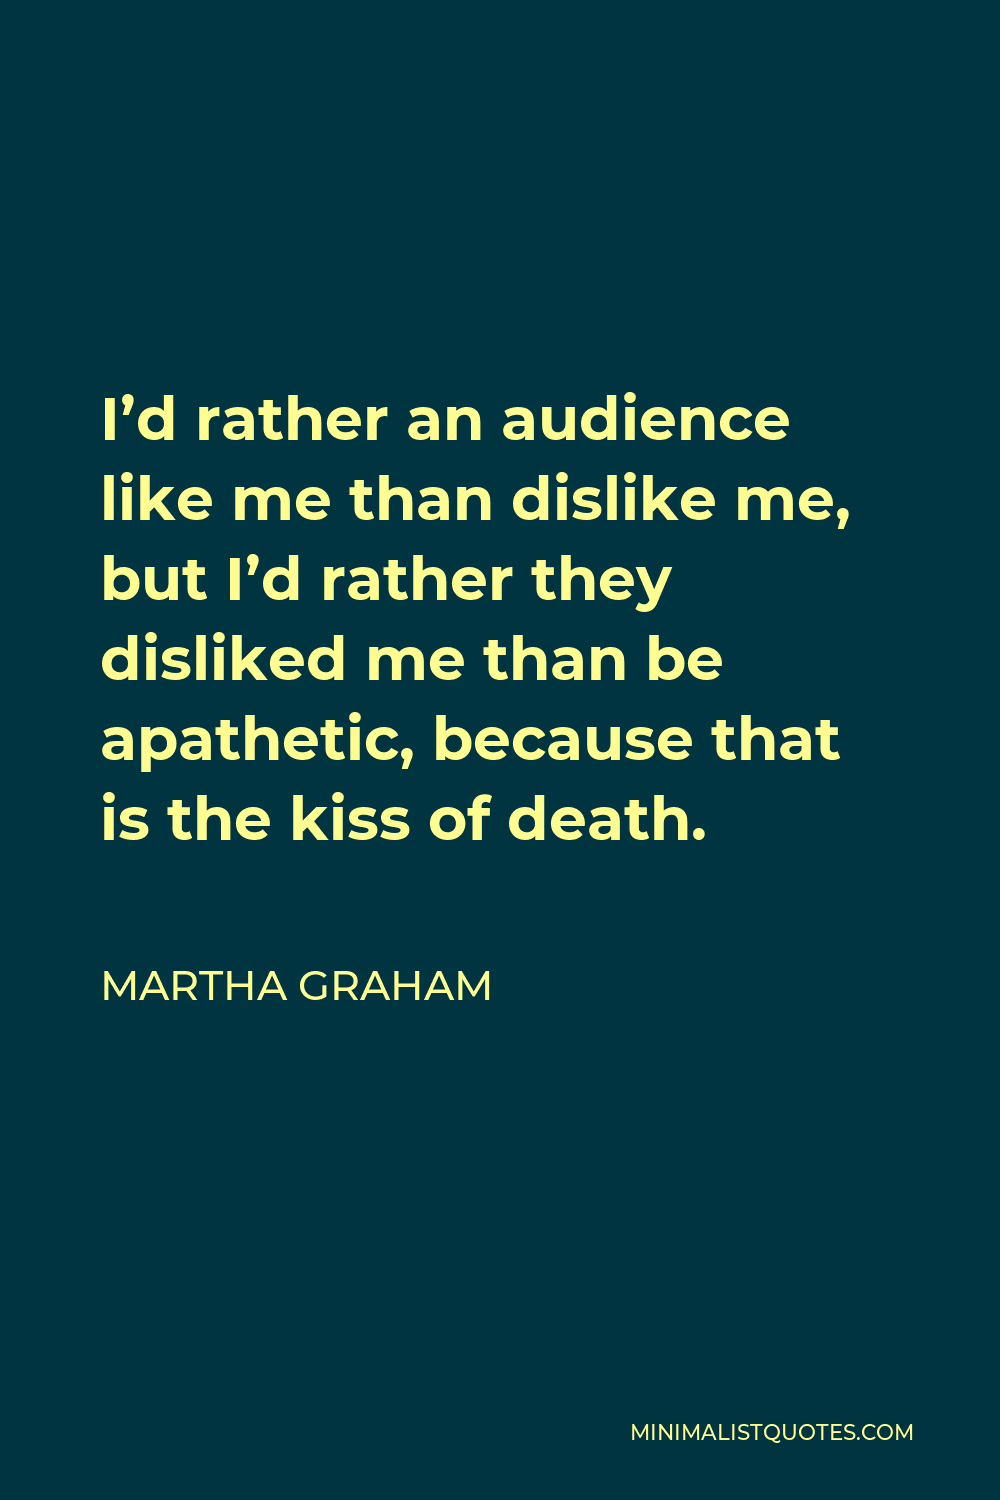 Martha Graham Quote - I’d rather an audience like me than dislike me, but I’d rather they disliked me than be apathetic, because that is the kiss of death.